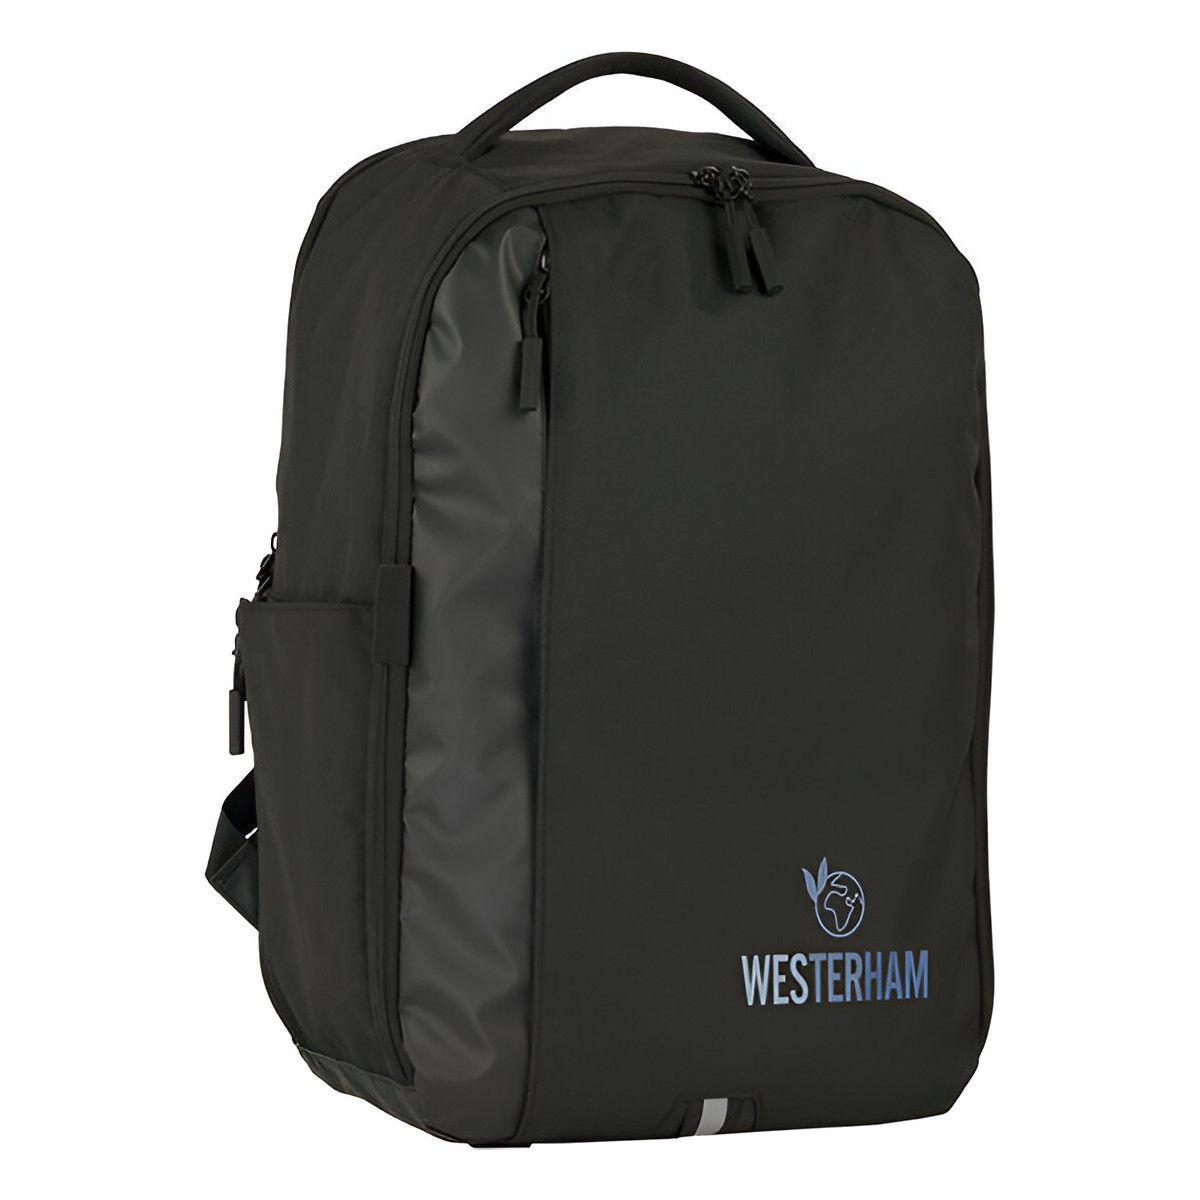 Westerham Recycled Business Backpack